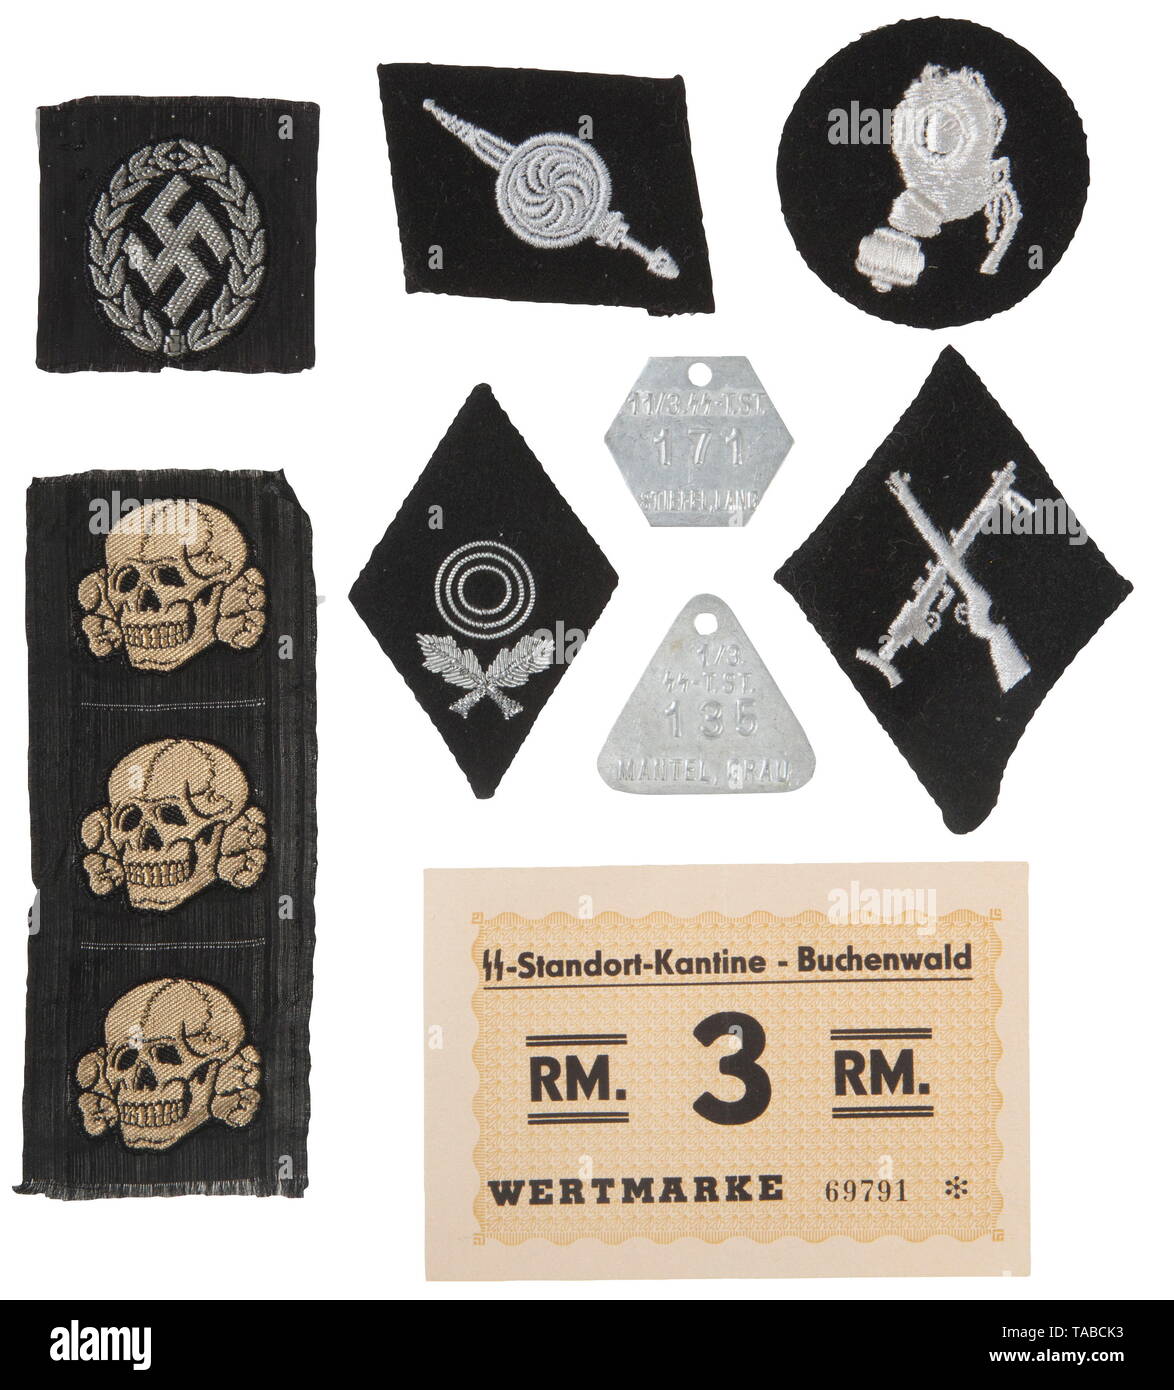 An SS insignia lot Three BeVo tropical hat death's heads, BeVo aux.-police 'schuma' cap insignia, embroidered 'Kaukasischer Waffen-Verband der SS' collar tab, embroidered gas protection patch, embroidered armourer NCO diamond, embroidered bullion 1st class marksmanship diamond, two aluminium garment tags and a 3 RM SS-Standortkantine-Buchenwald note. USA-lot, see page 4. historic, historical, 20th century, 1930s, 1940s, Waffen-SS, armed division of the SS, armed service, armed services, NS, National Socialism, Nazism, Third Reich, German Reich, Germany, military, militaria,, Editorial-Use-Only Stock Photo